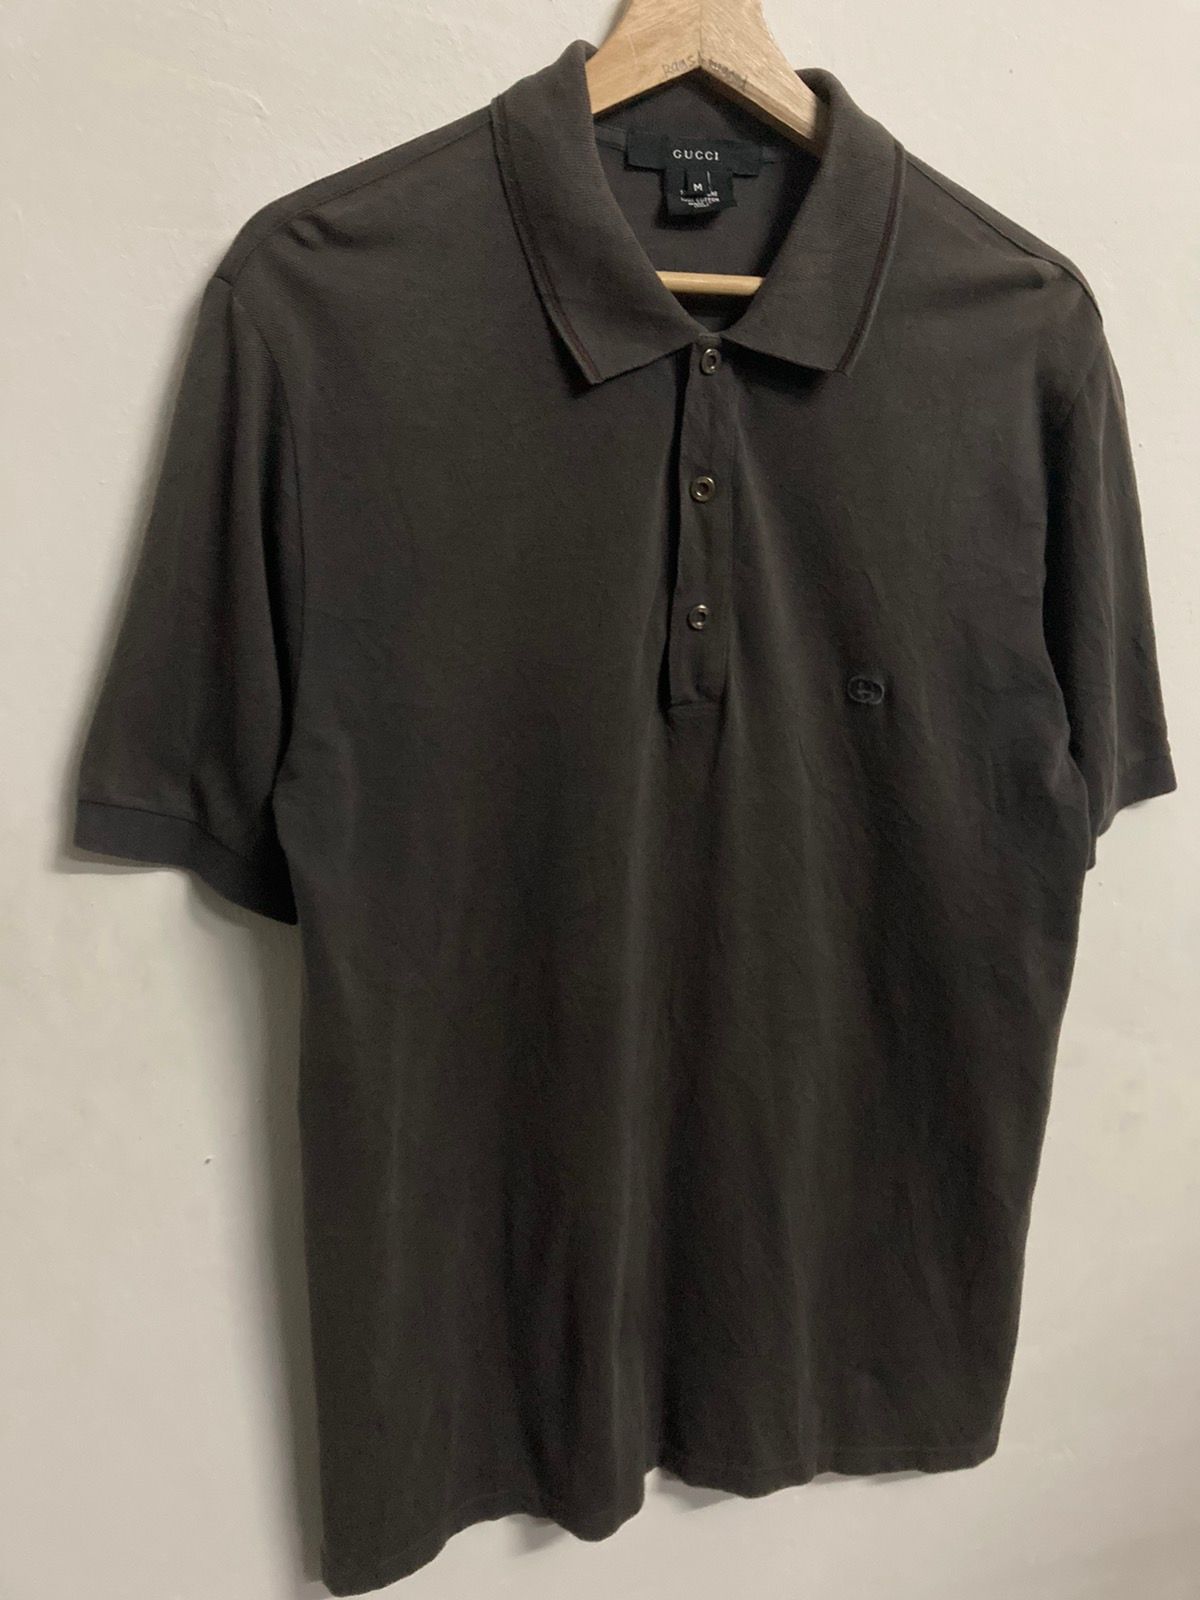 Authentic Gucci Polo T-shirt - 6